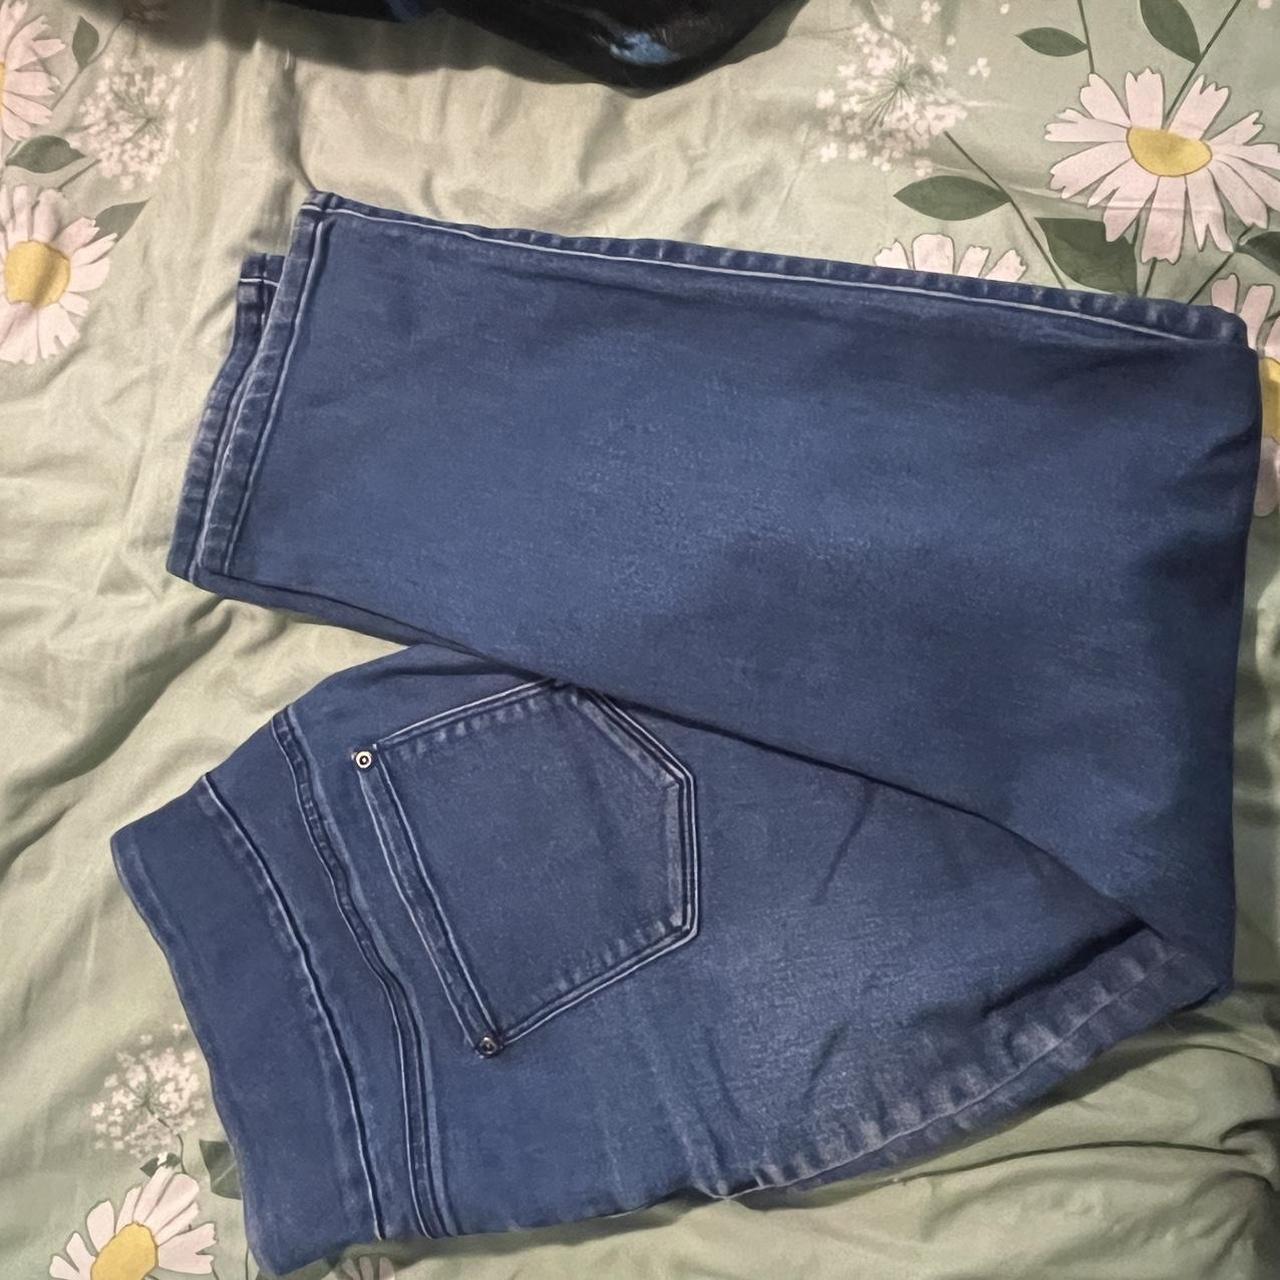 white stag jeans no button like leggings so comfy - Depop